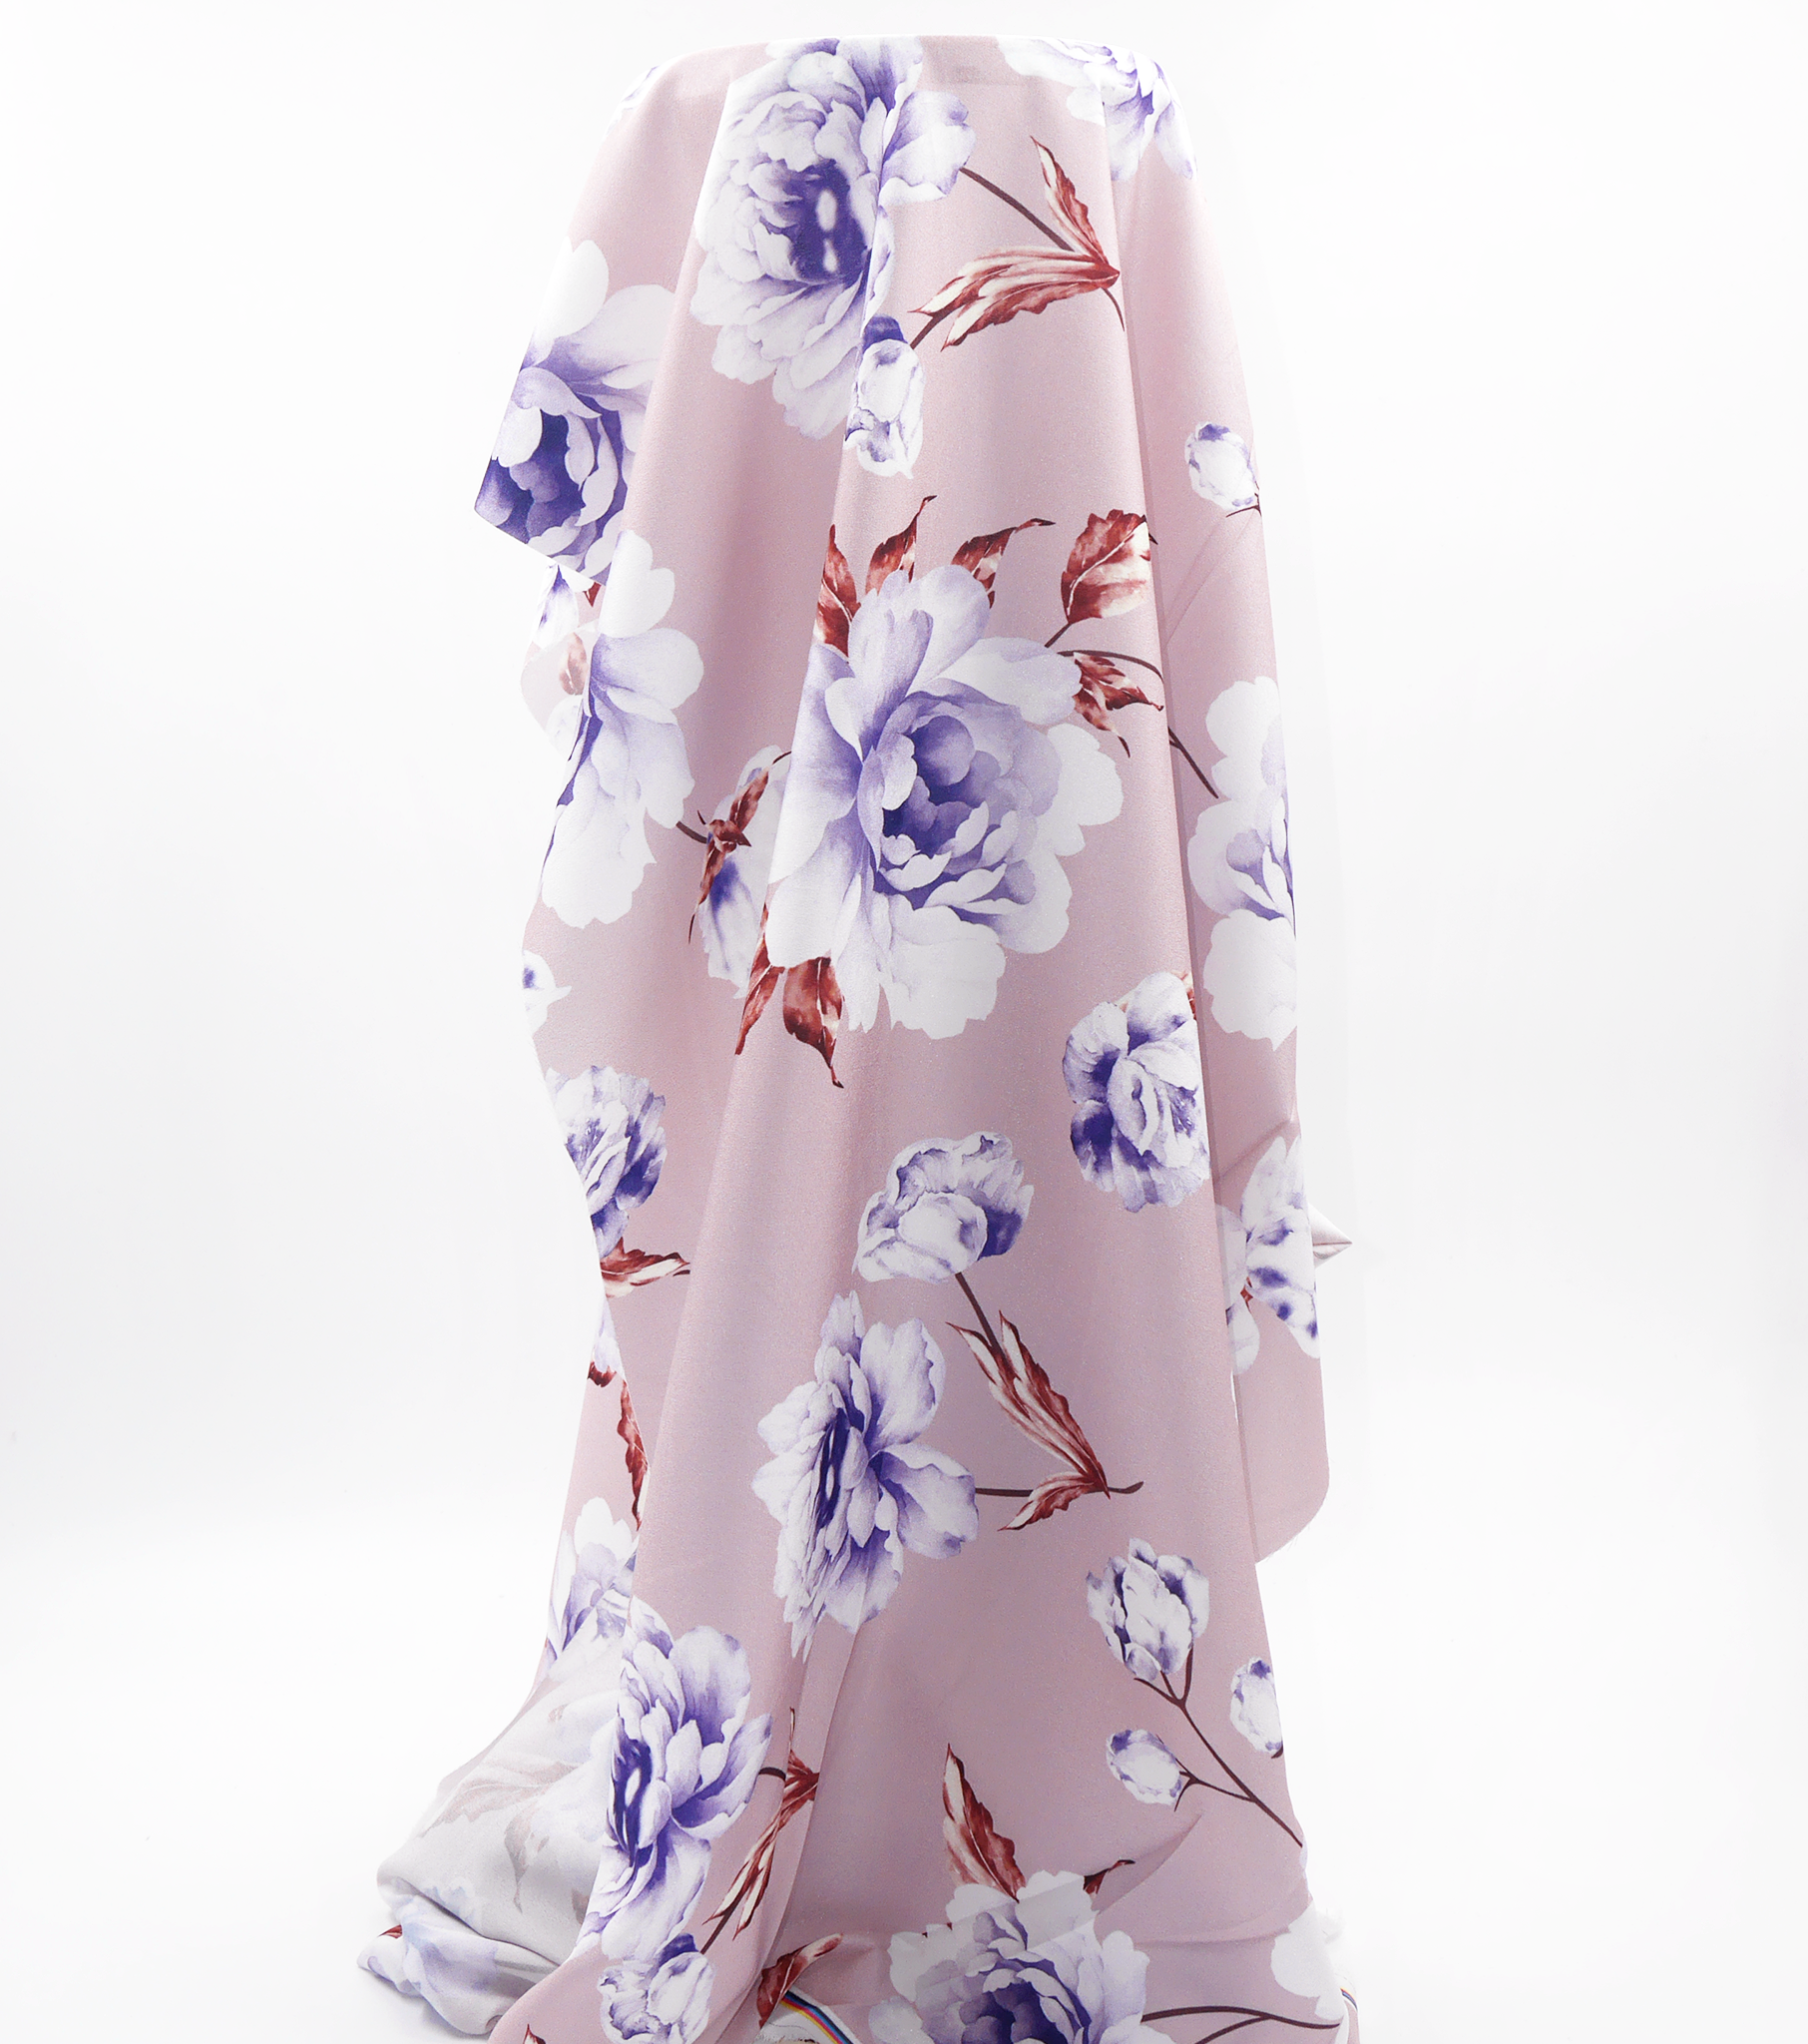 Printed Polyester $10.00p/m - Pink Floral (Online Only)